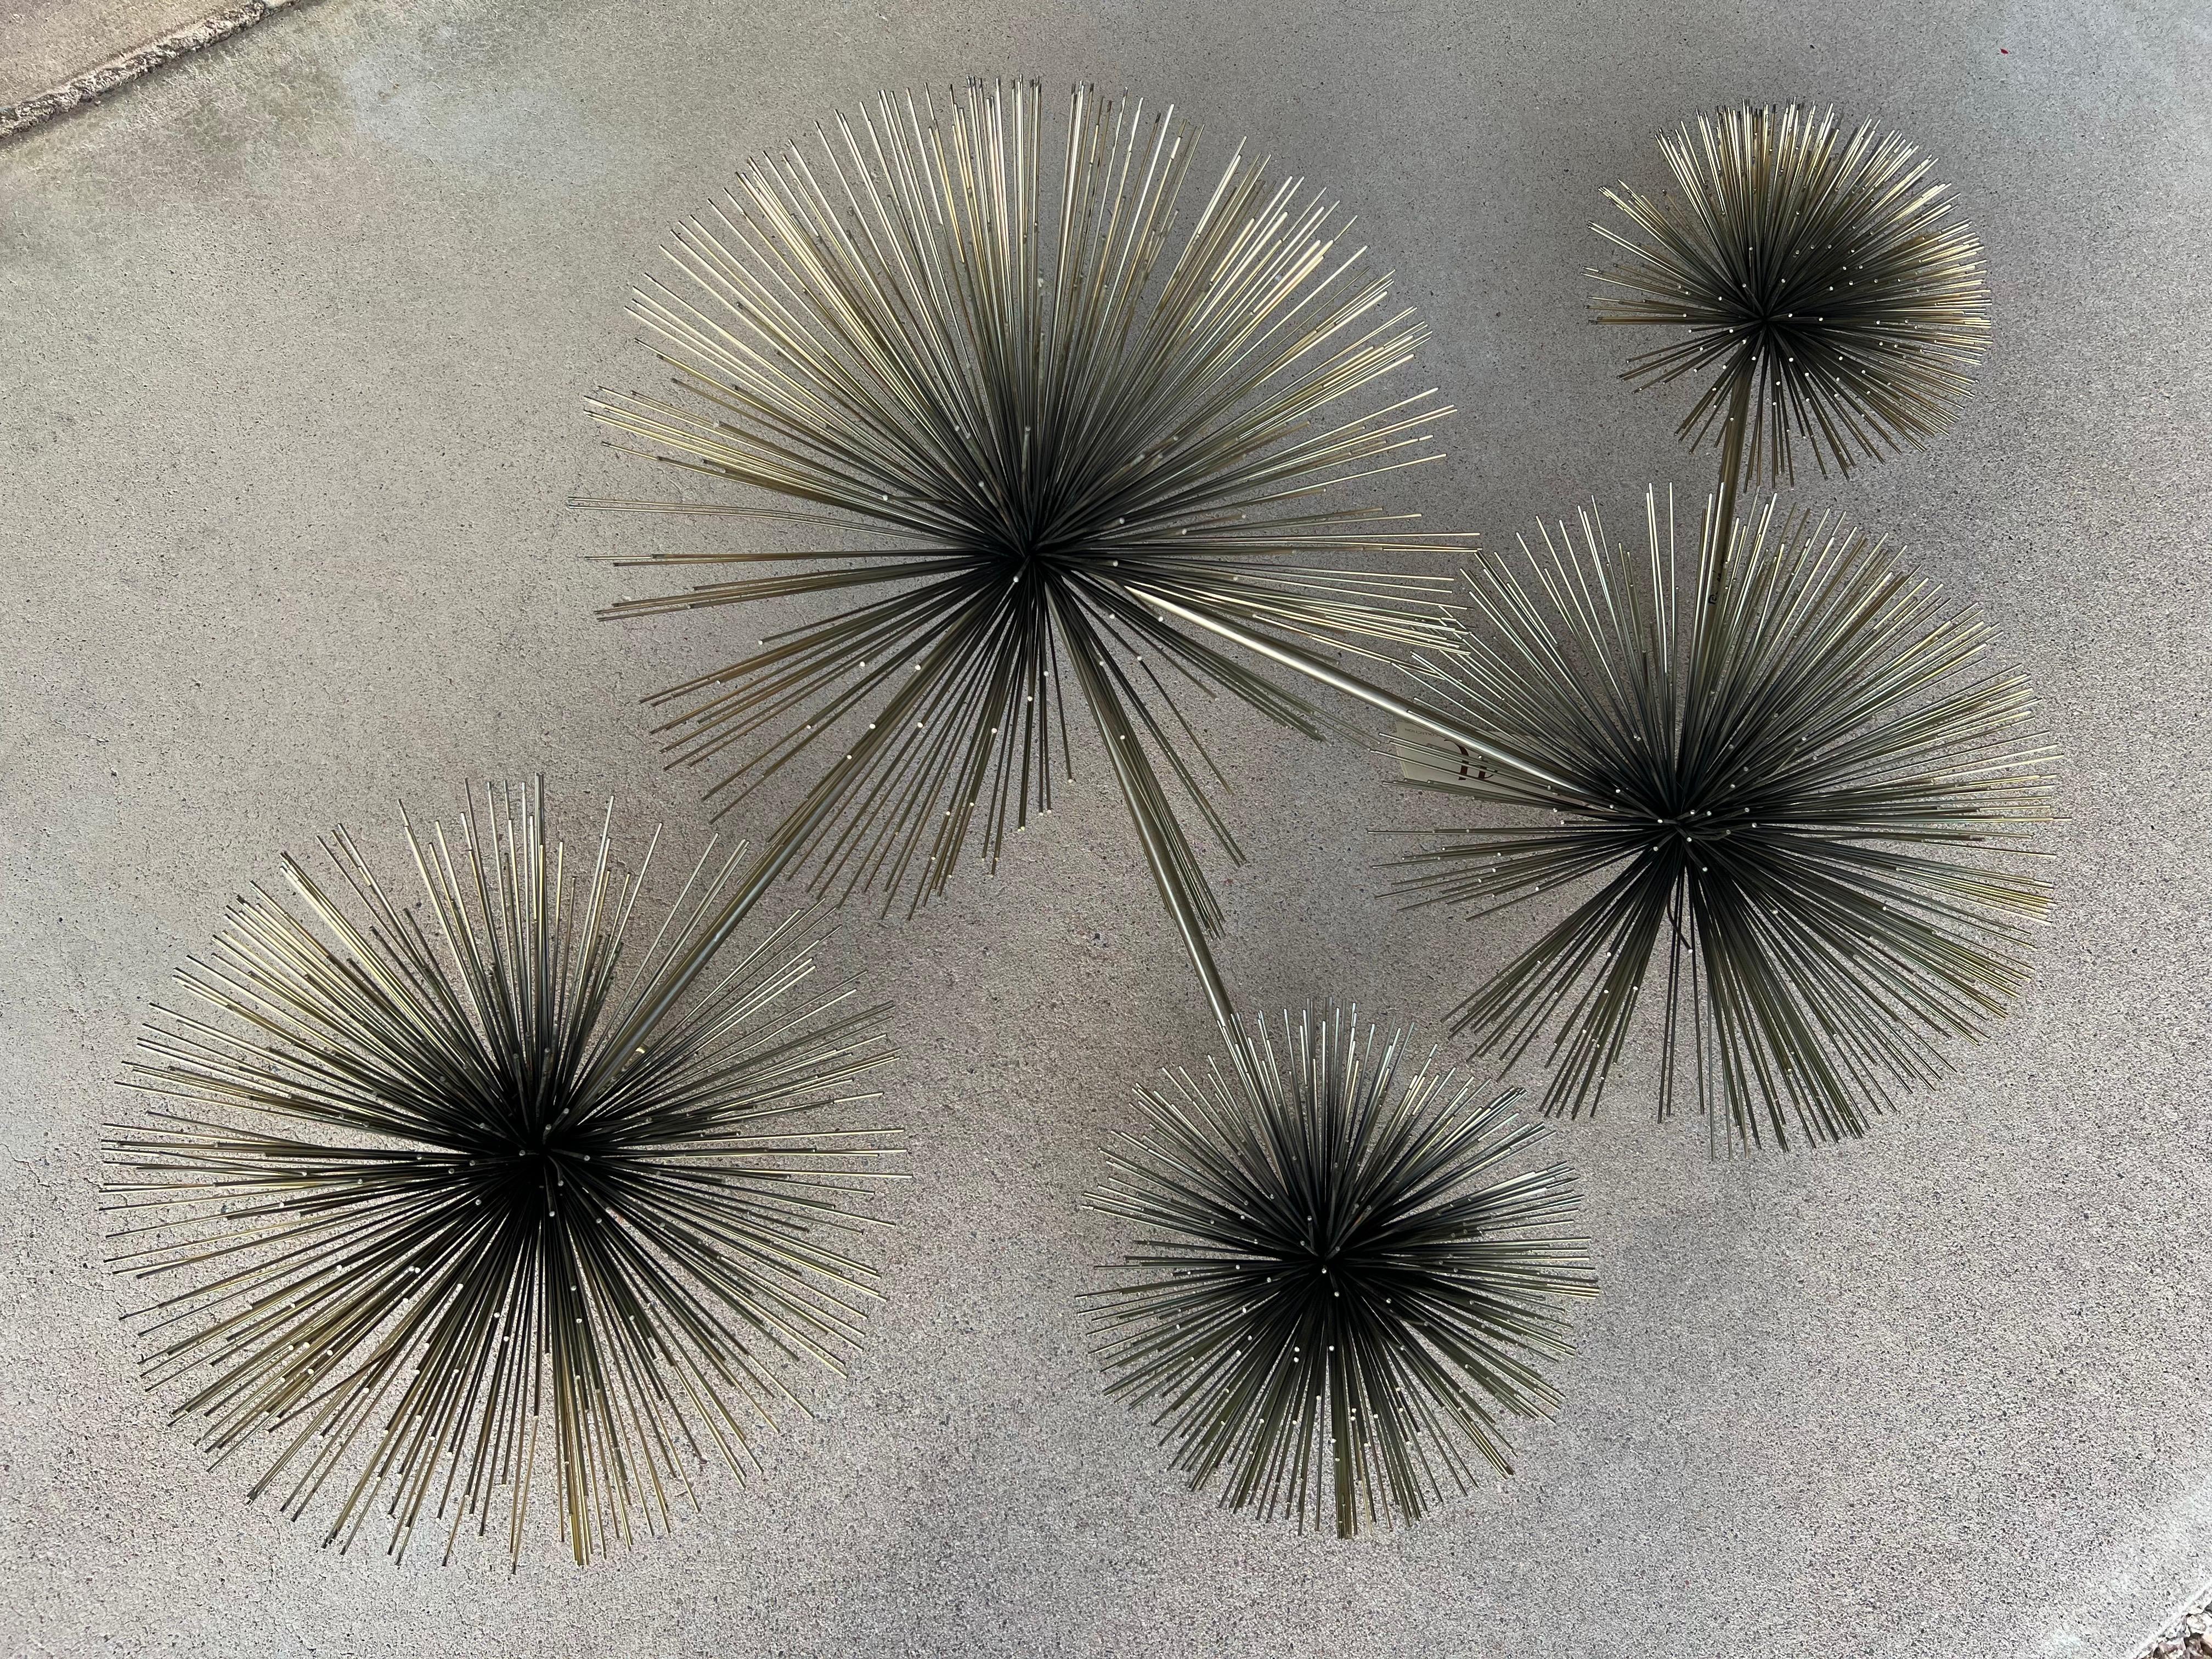 1979 C. Jeré or Curtis Jere Artisan House brass metal wall sculpture. Signed and dated with original paper tag. It’s often referred to as the pom pom or urchin design. According to the tag, the correct name is dandelion. 42” wide x 28” tall x 11”